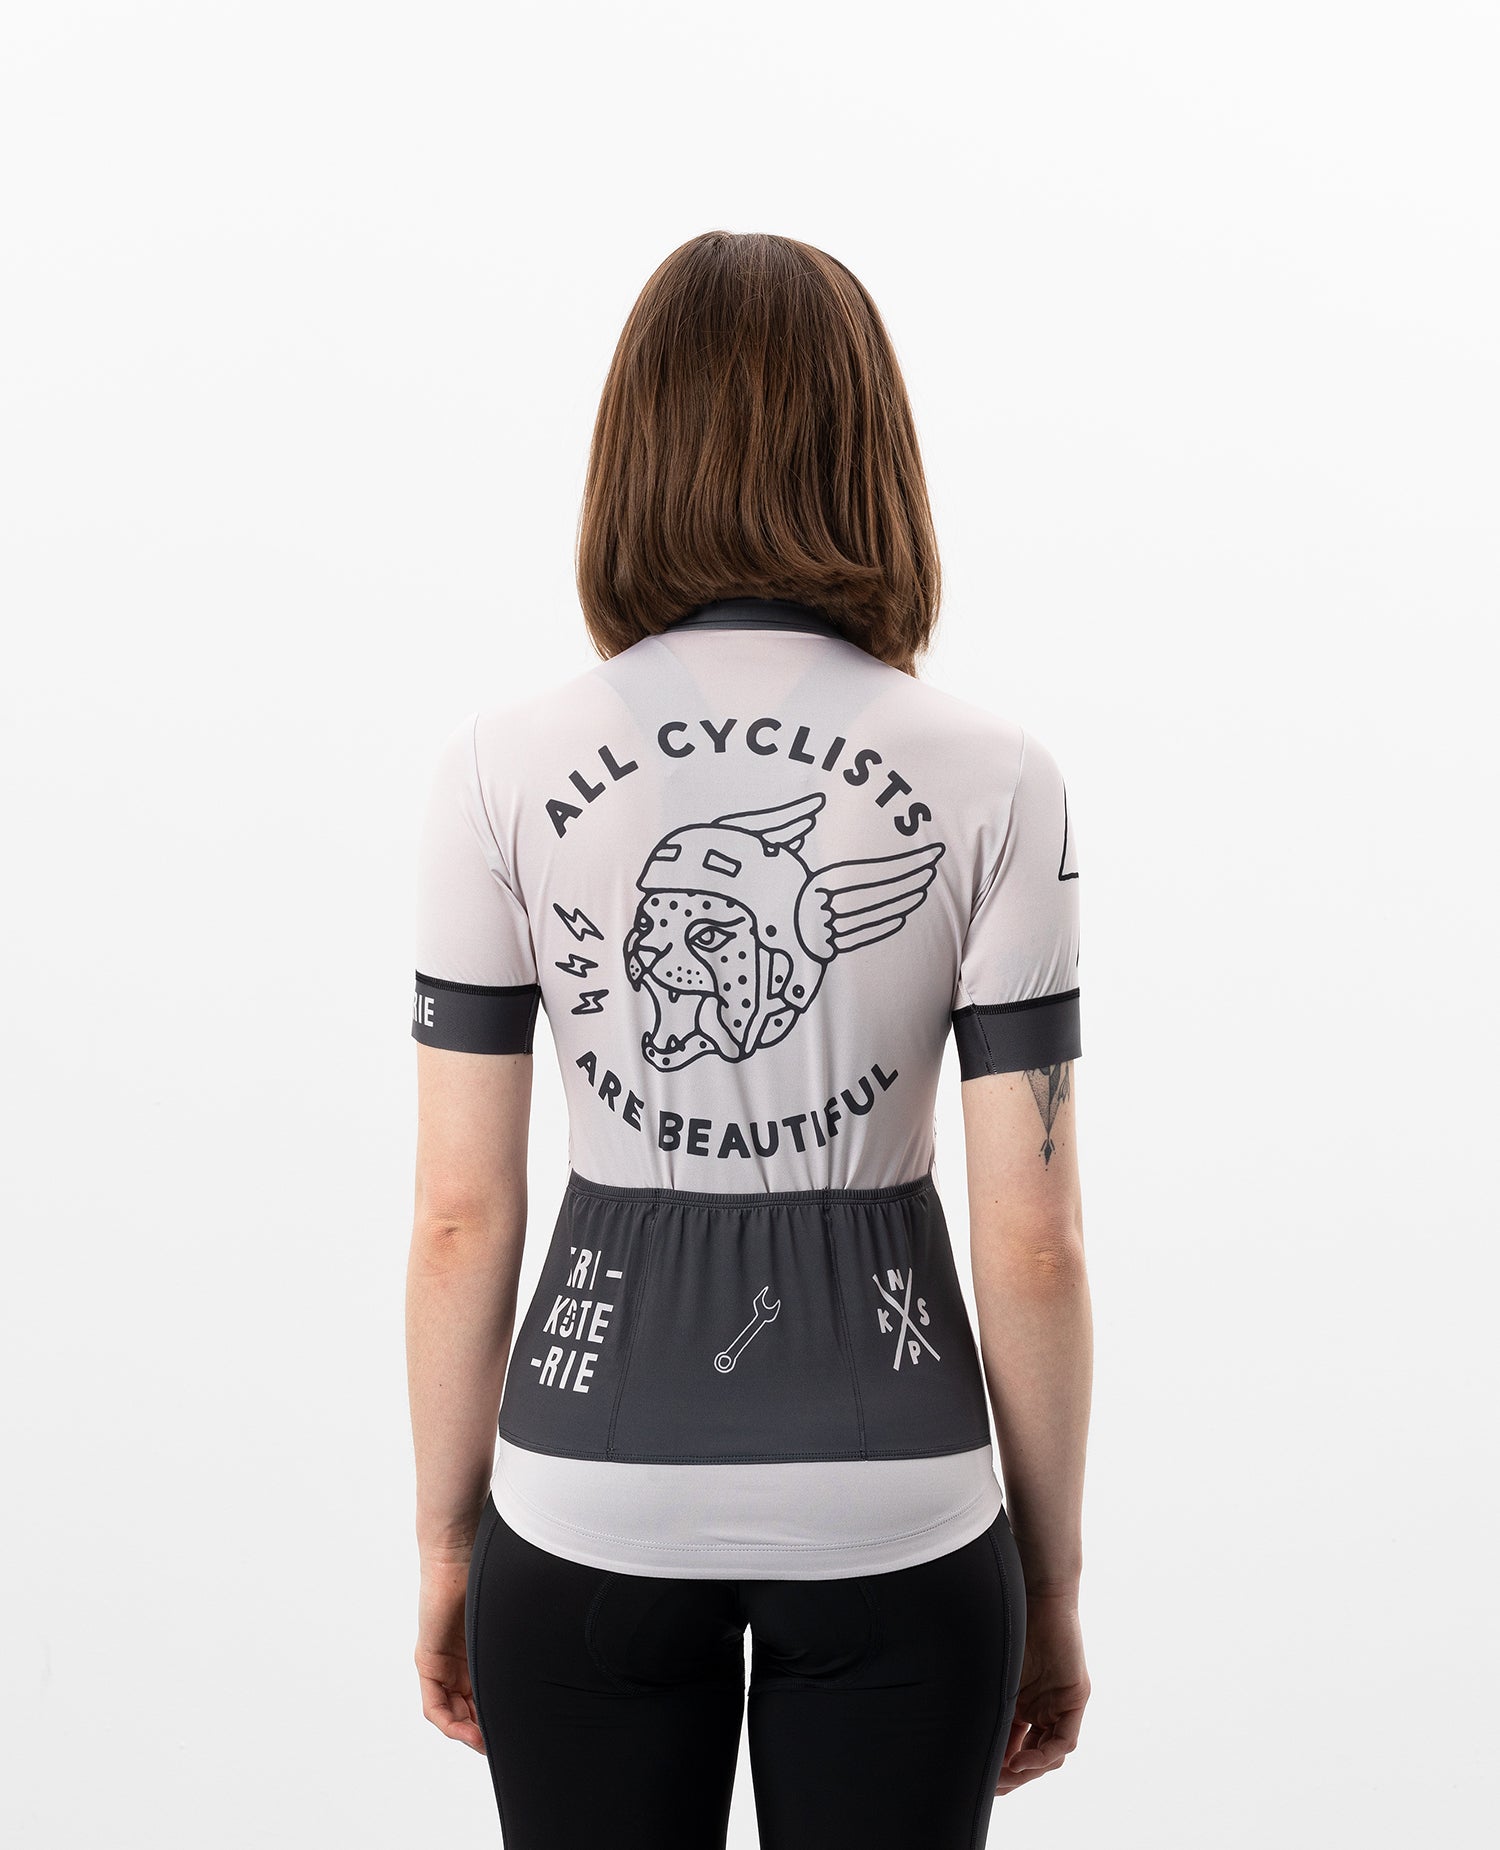 All Cyclists Are Beautiful - NKSP x Trikoterie